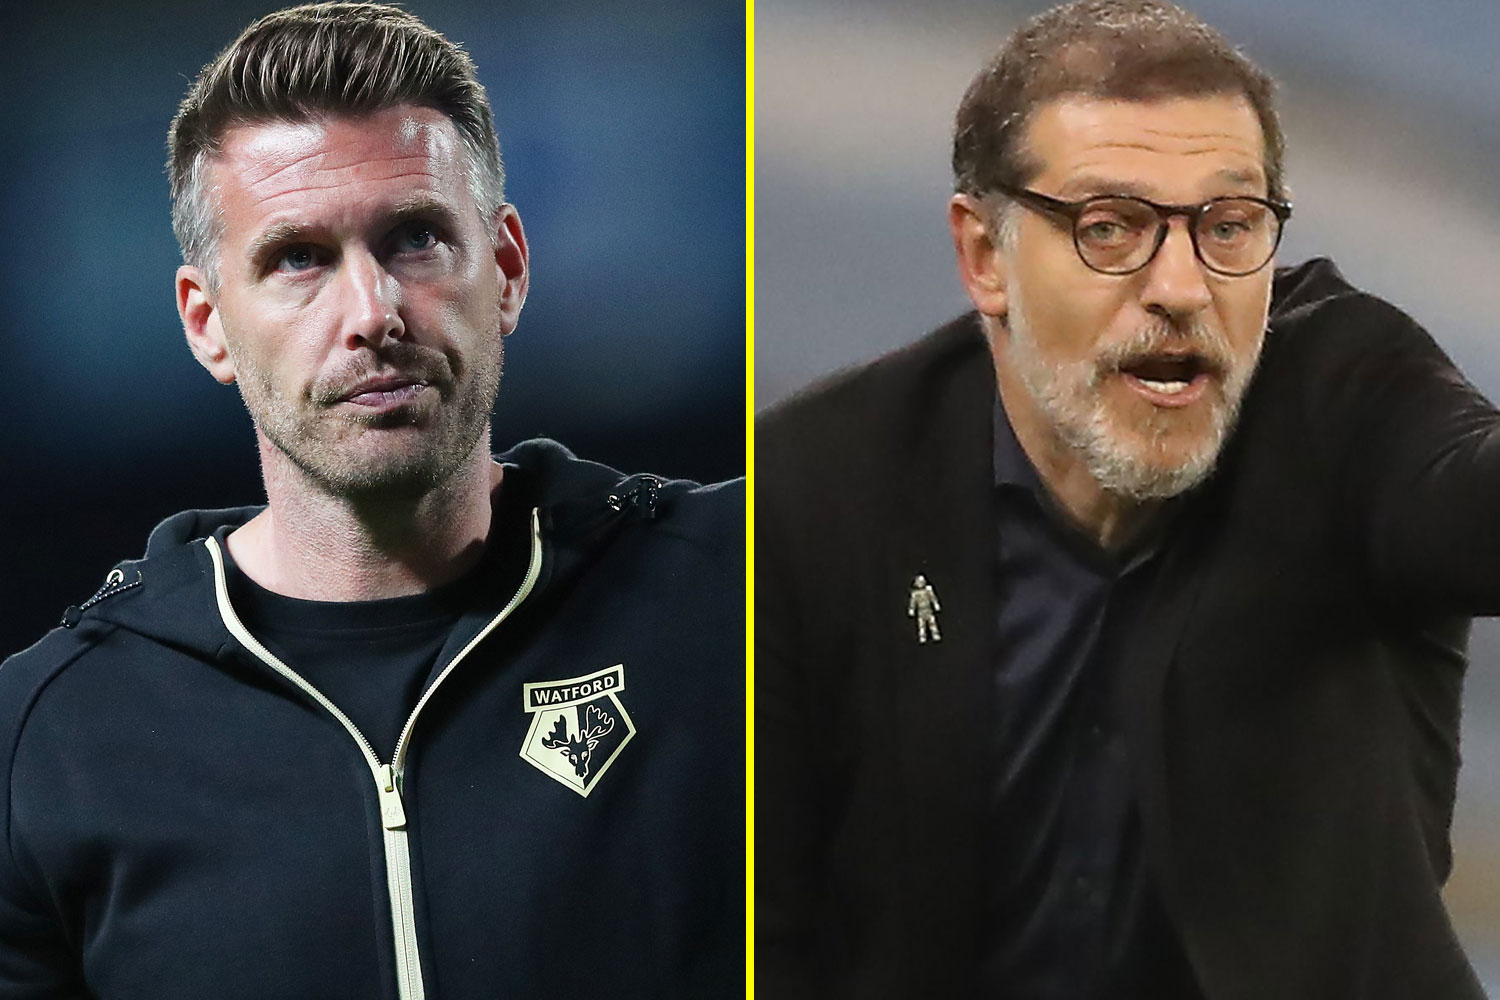 Watford sack Rob Edwards and set to name ex-West Ham boss Slaven Bilic as next manager – their fifth in last 12 months